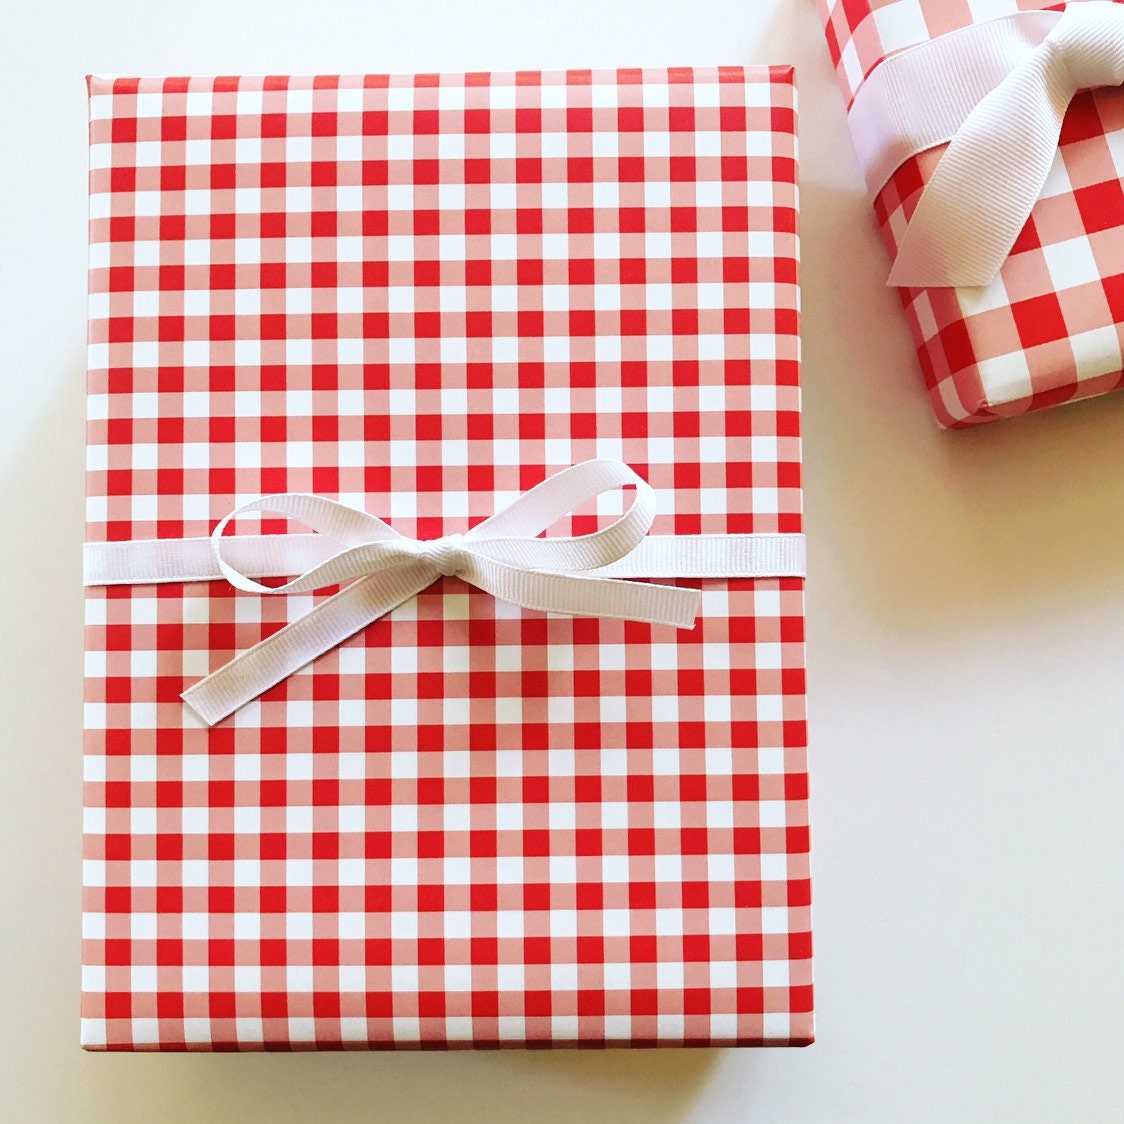 Mini Red Gingham Wrapping Paper